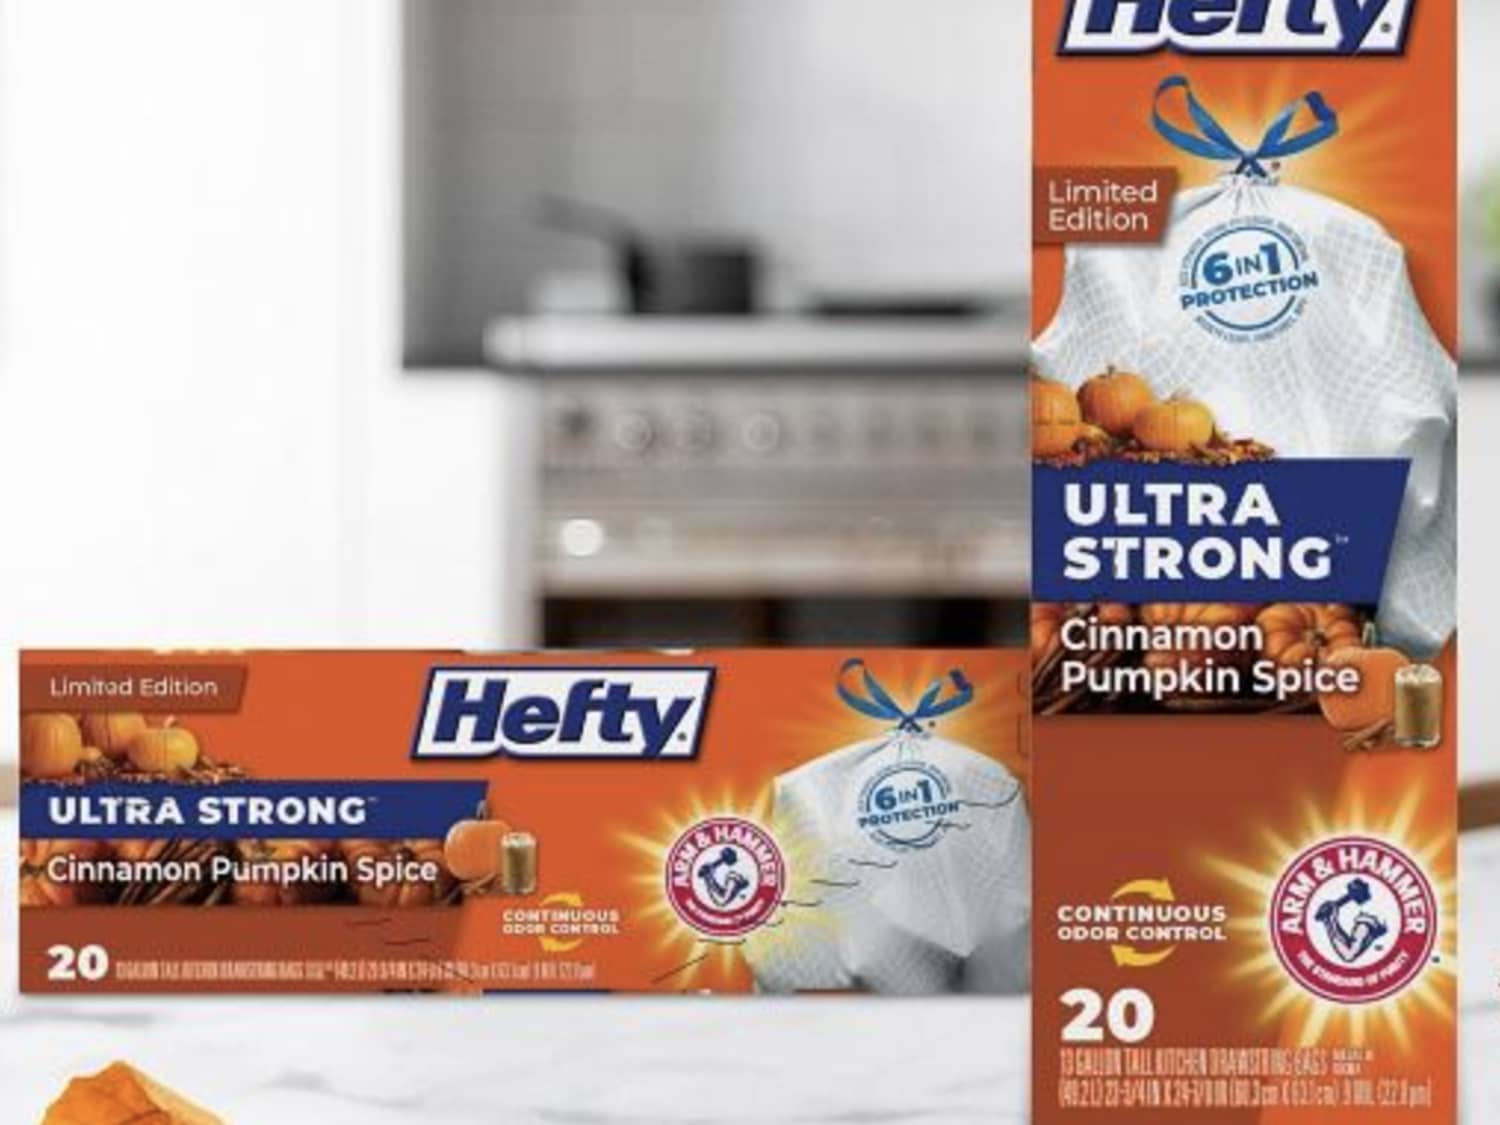 Pumpkin spice scented trash bags are now a thing